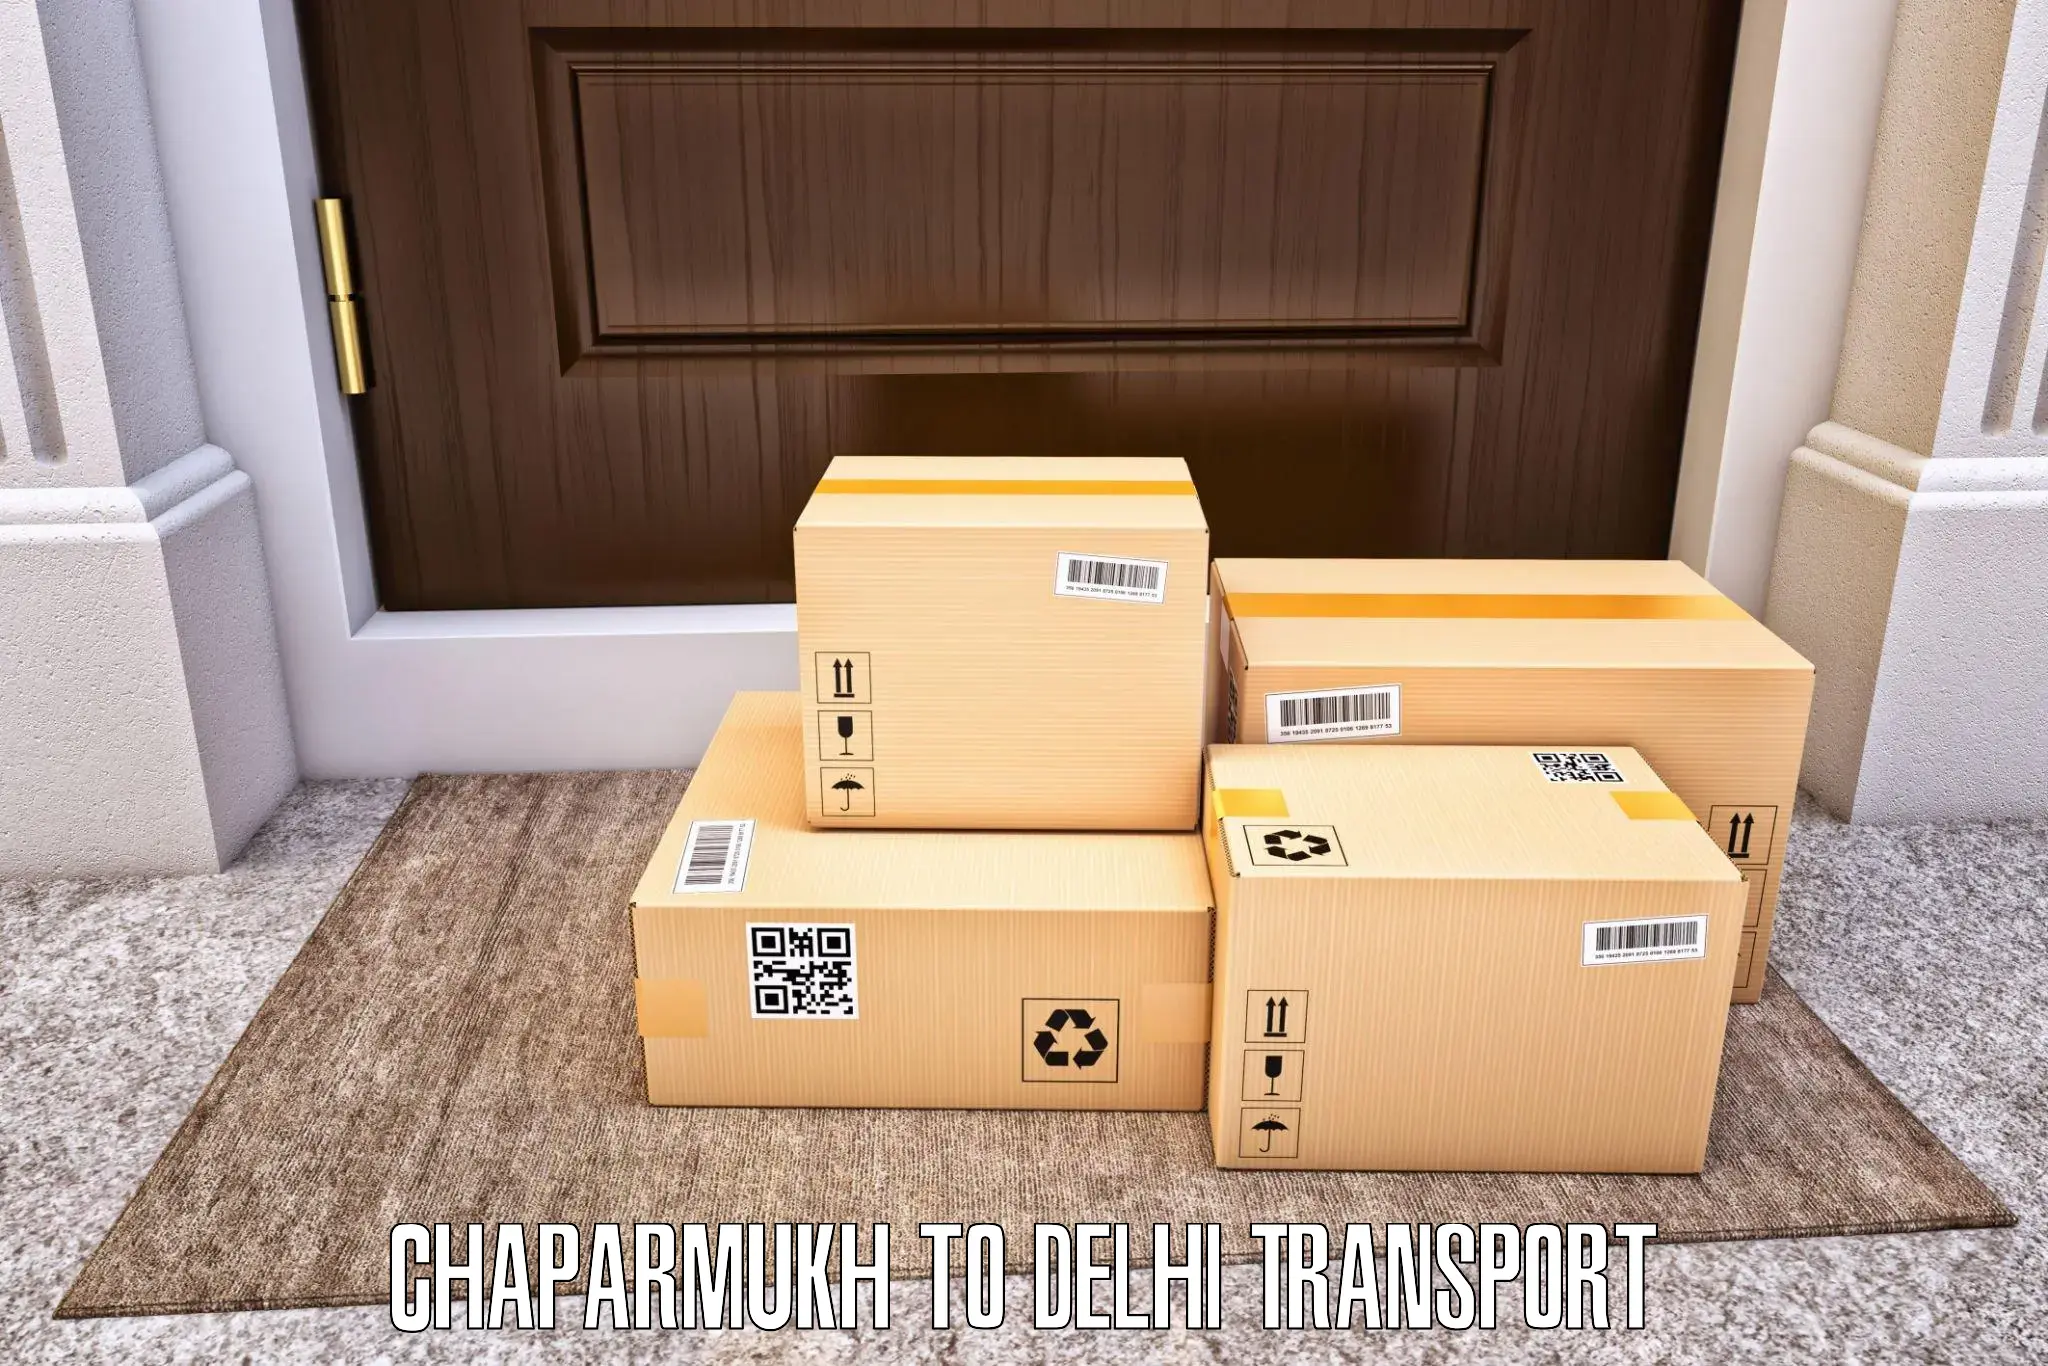 Two wheeler transport services in Chaparmukh to Delhi